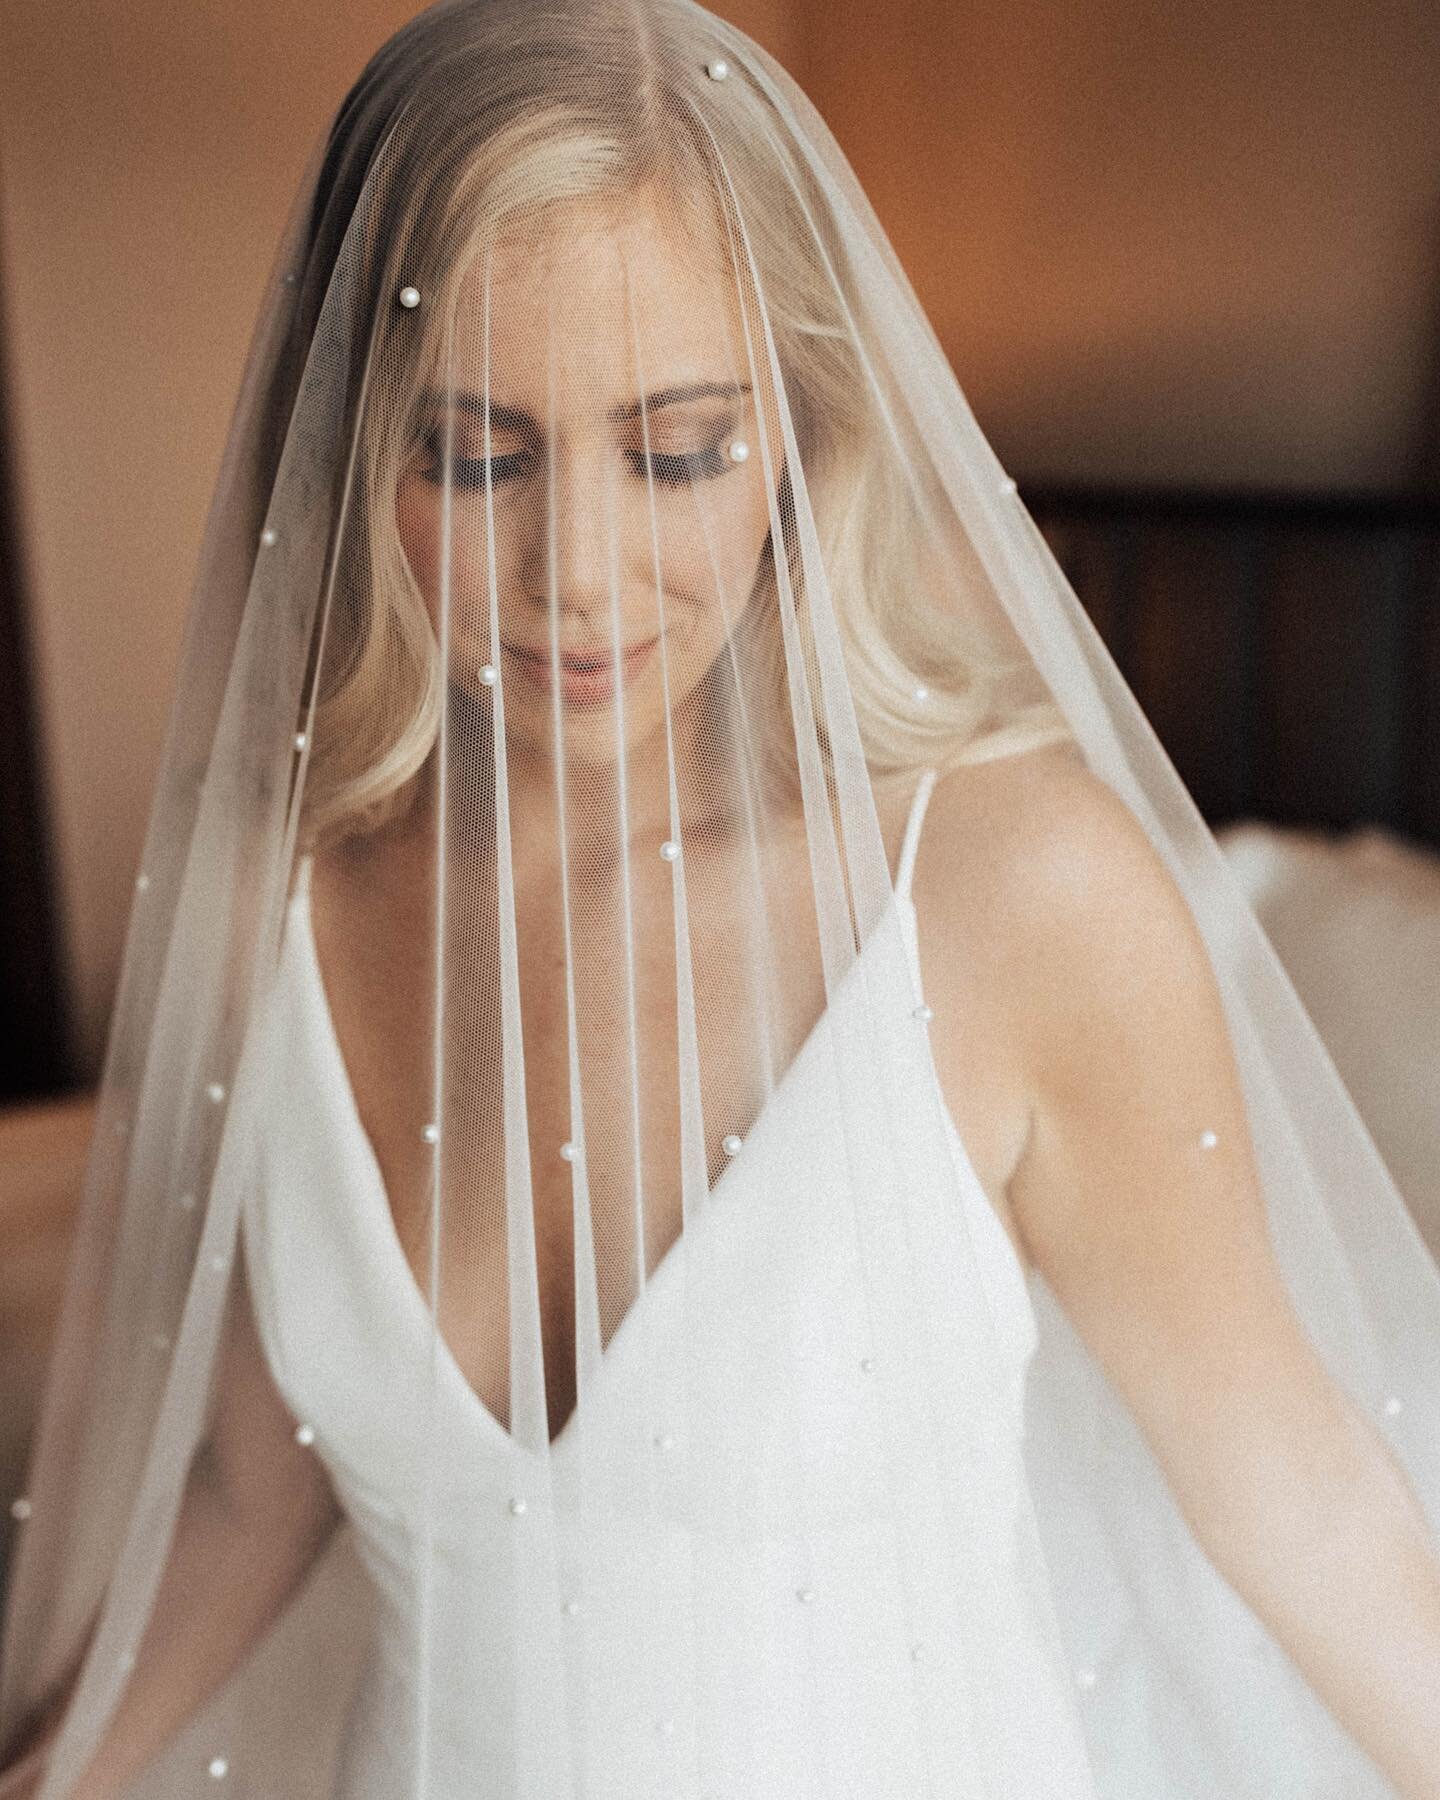 This veil 🤩 I&rsquo;m back home + took yesterday to recharge after a jam packed weekend!✨Today will be filled with lots of editing + a zoom mentor session for a sweet, new photographer! I absolutely love doing 1-on-1 mentor sessions - so if you&rsqu